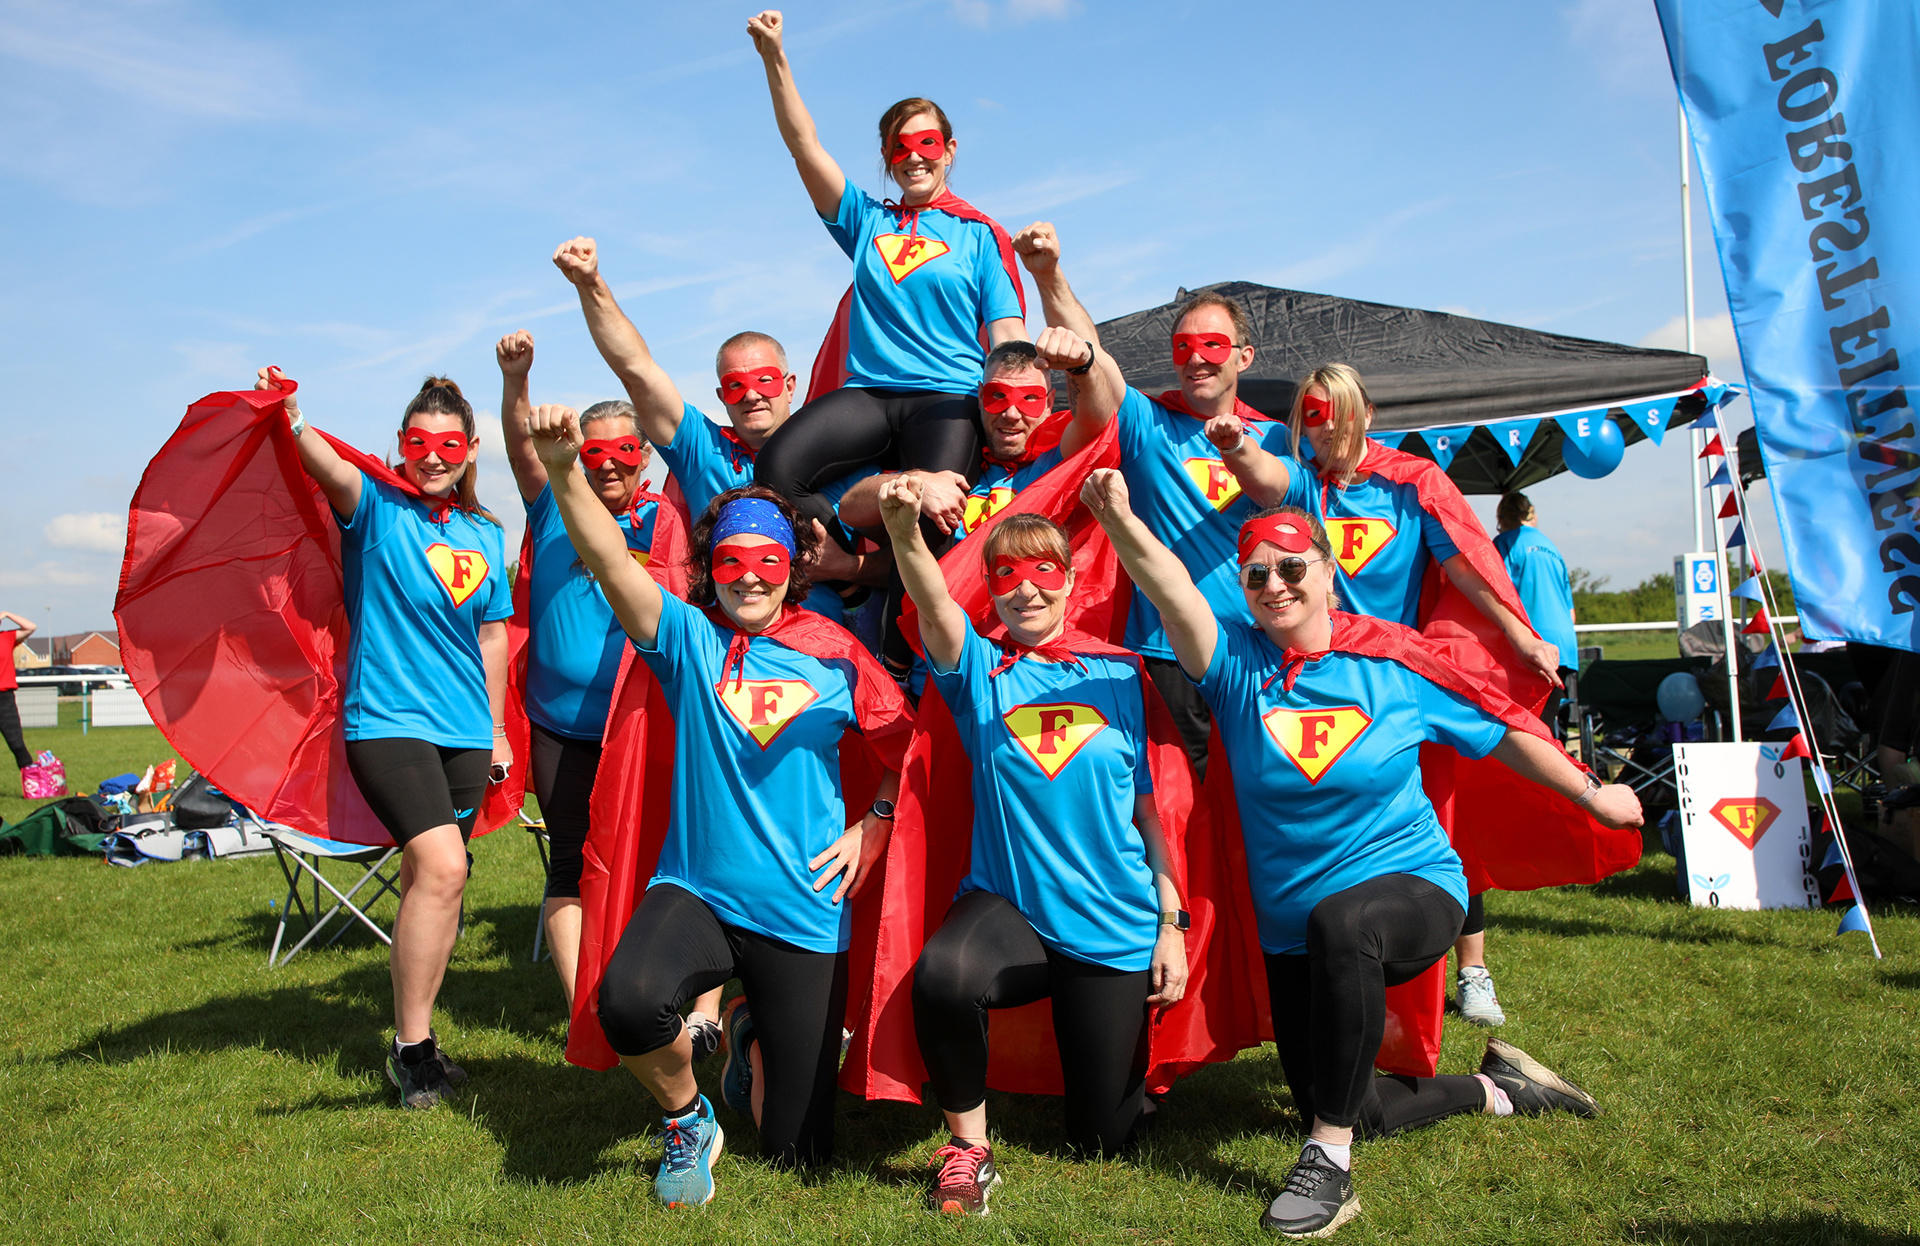 A team dressed as superheroes for It's a Knockout event